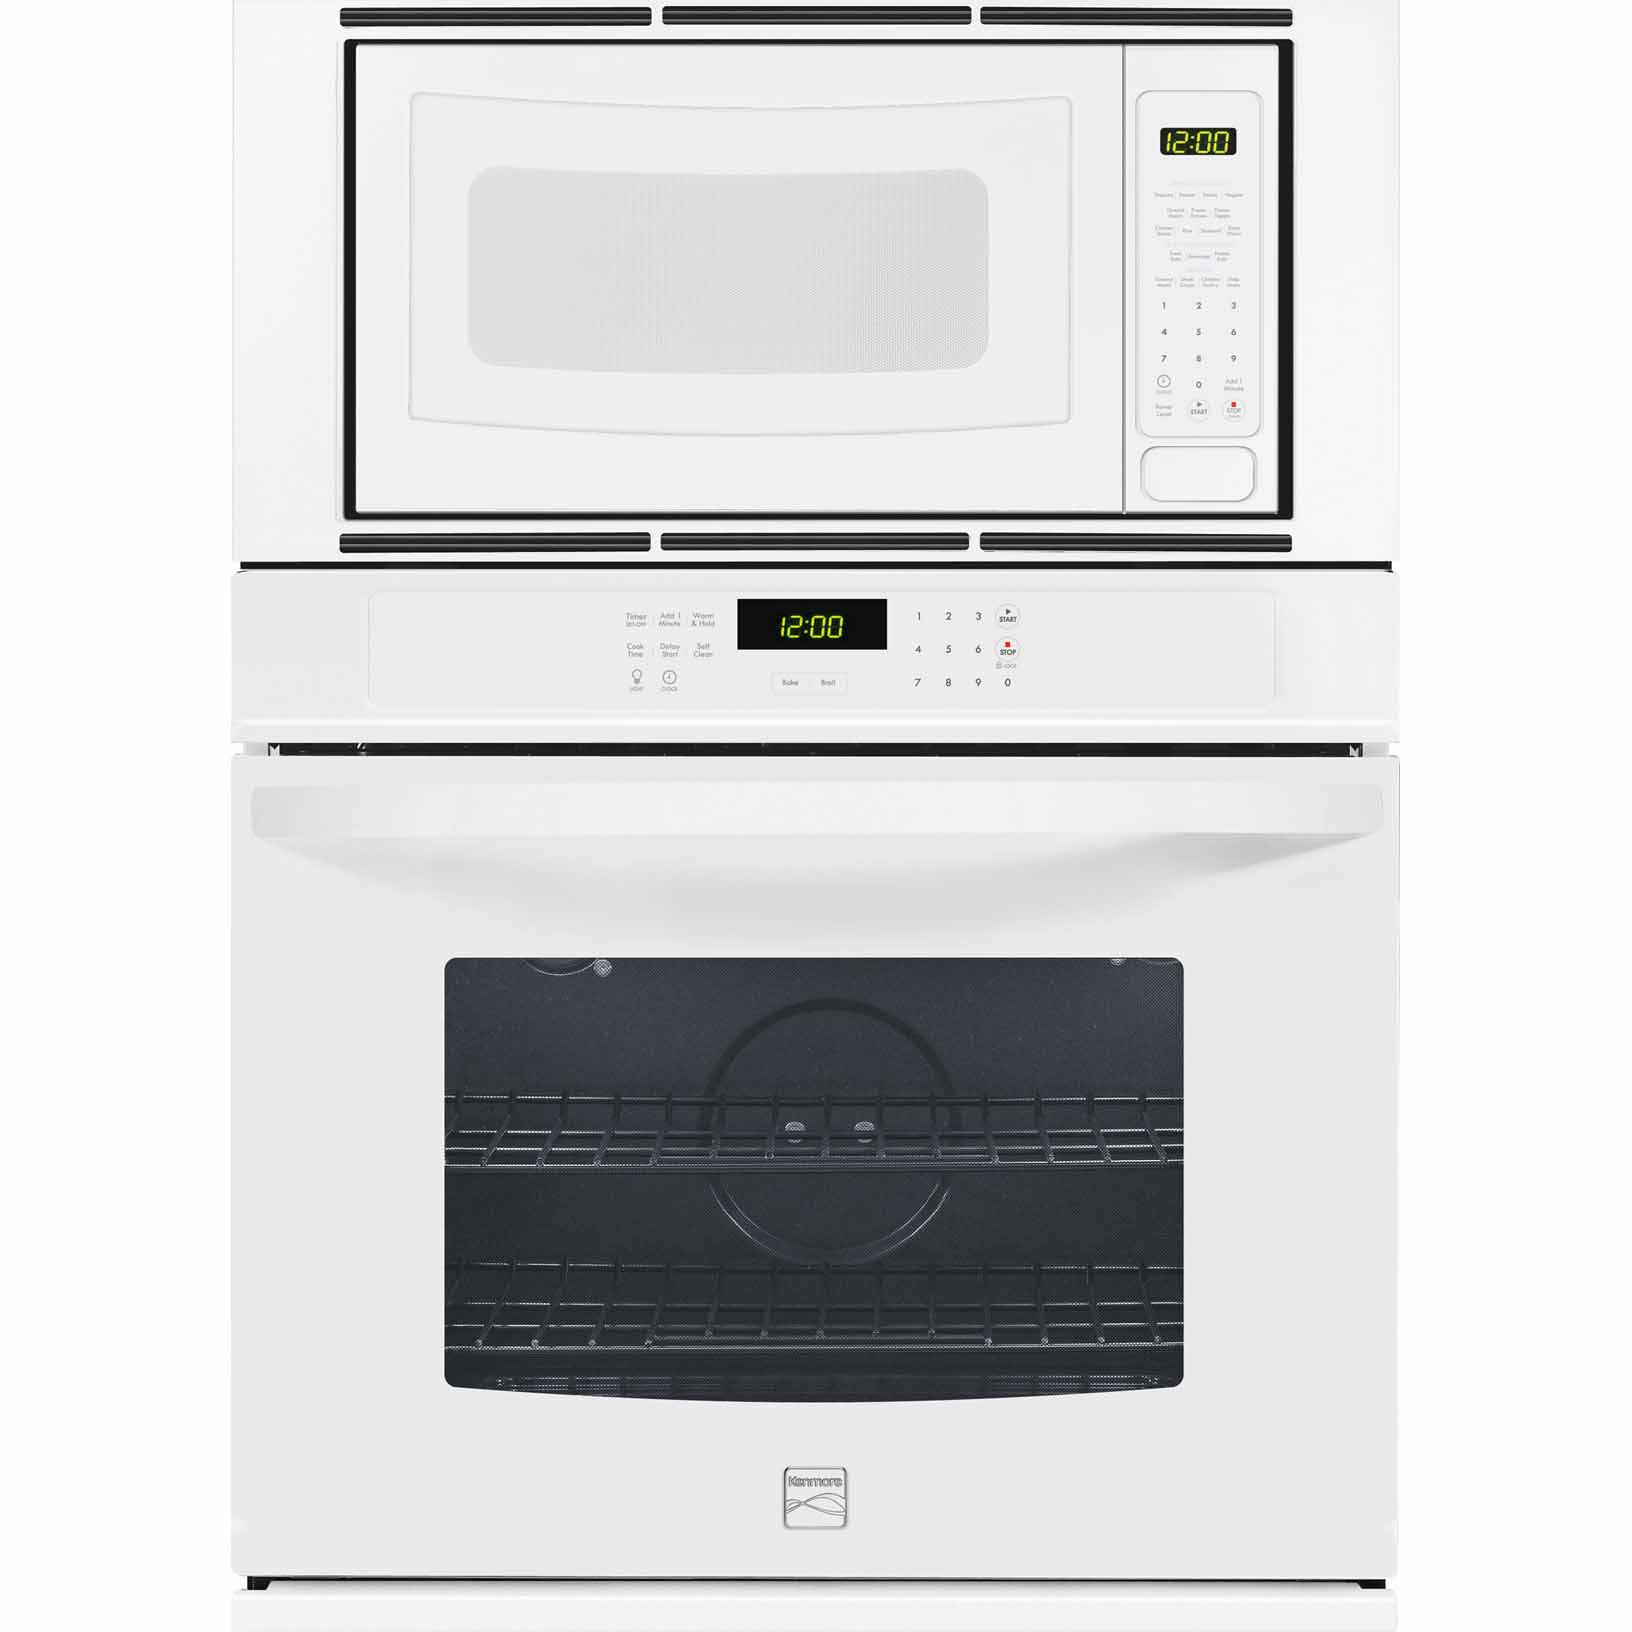 0012505801235 - 49612 30 ELECTRIC COMBINATION WALL OVEN - WHITE